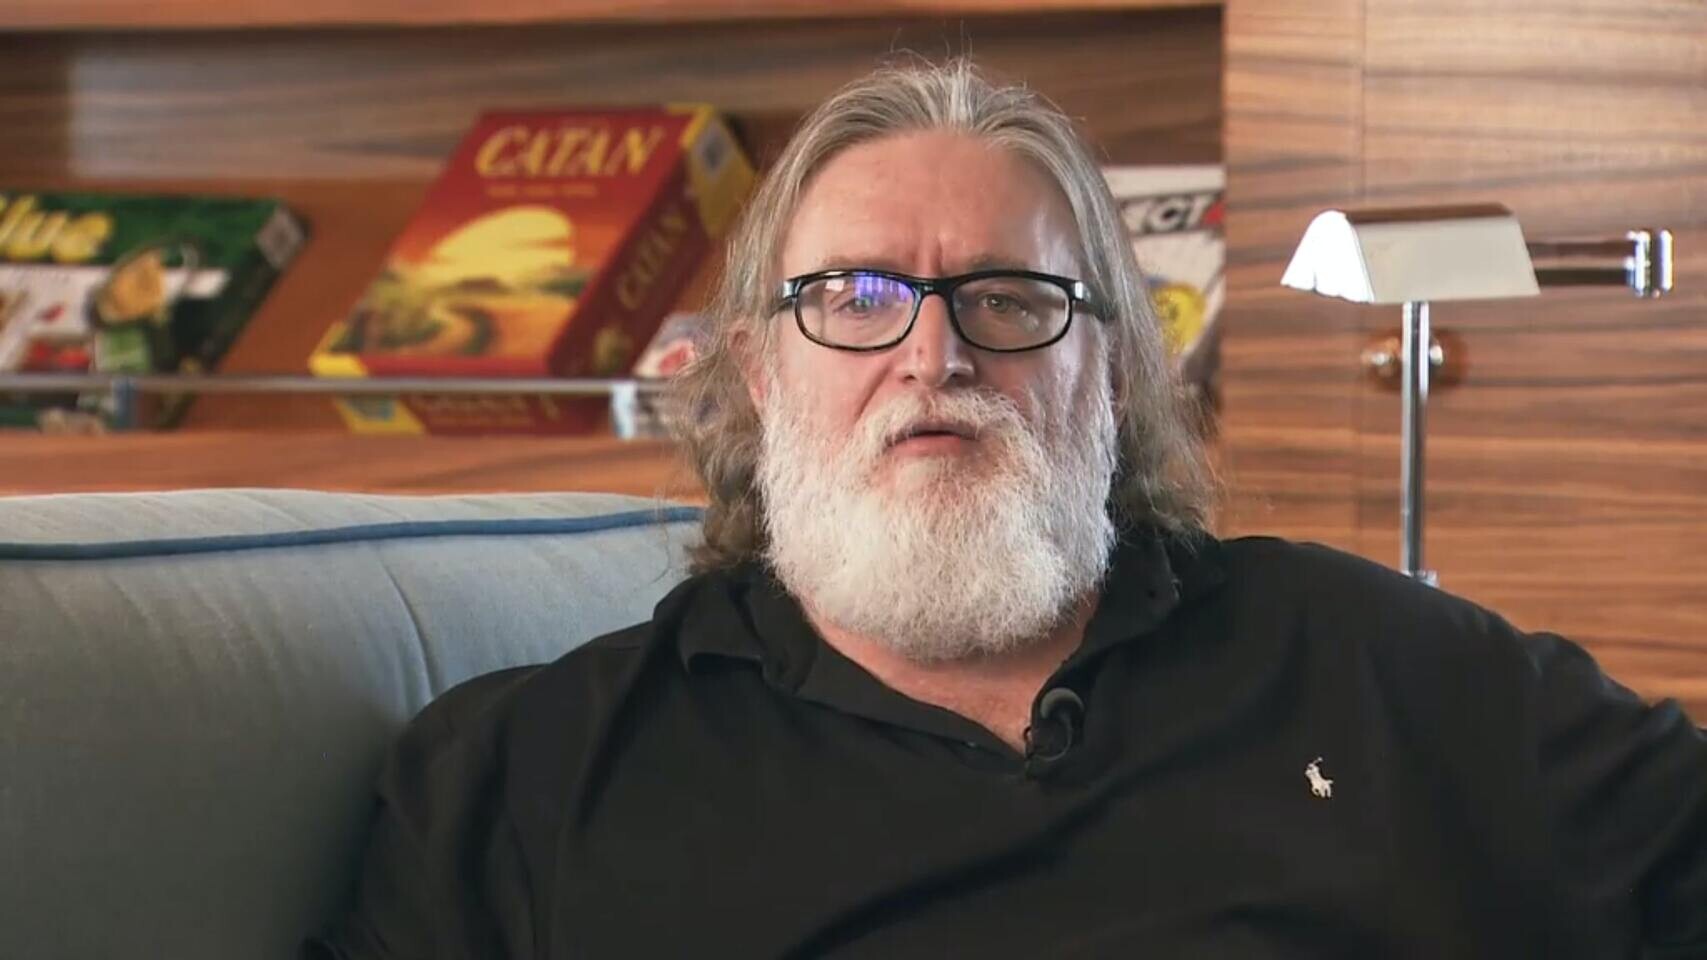 Steam Community :: Group :: Lord Gabe Newell